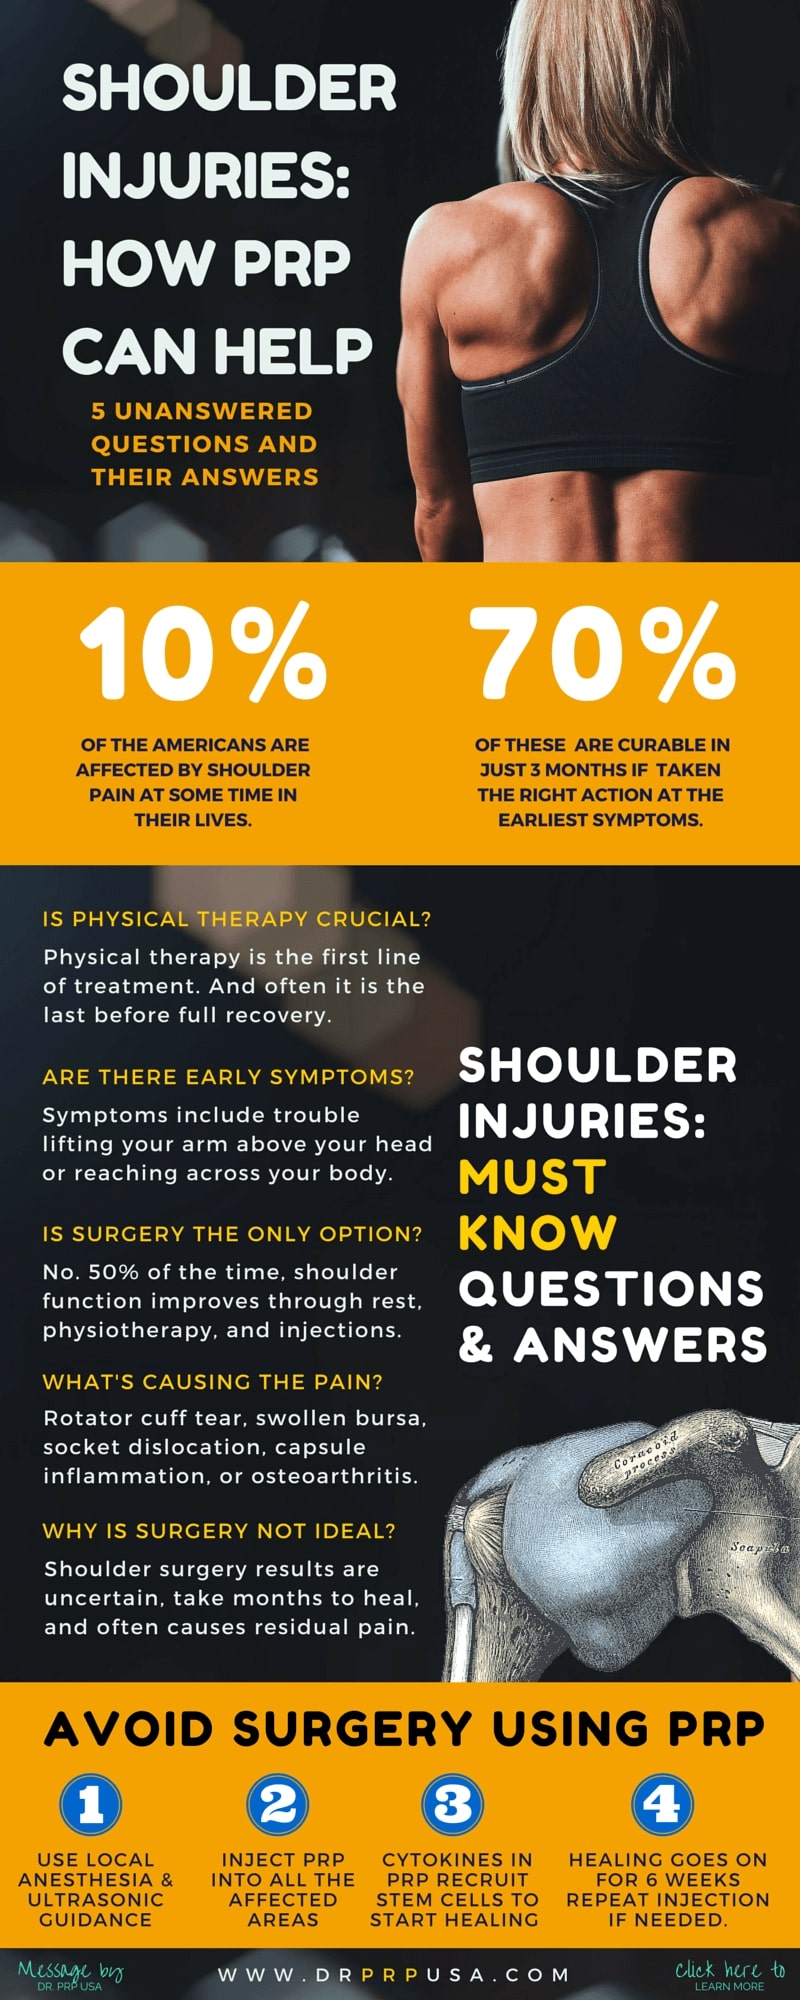 PRP Injection For Shoulder: Heal Injury Without Surgery Infographic